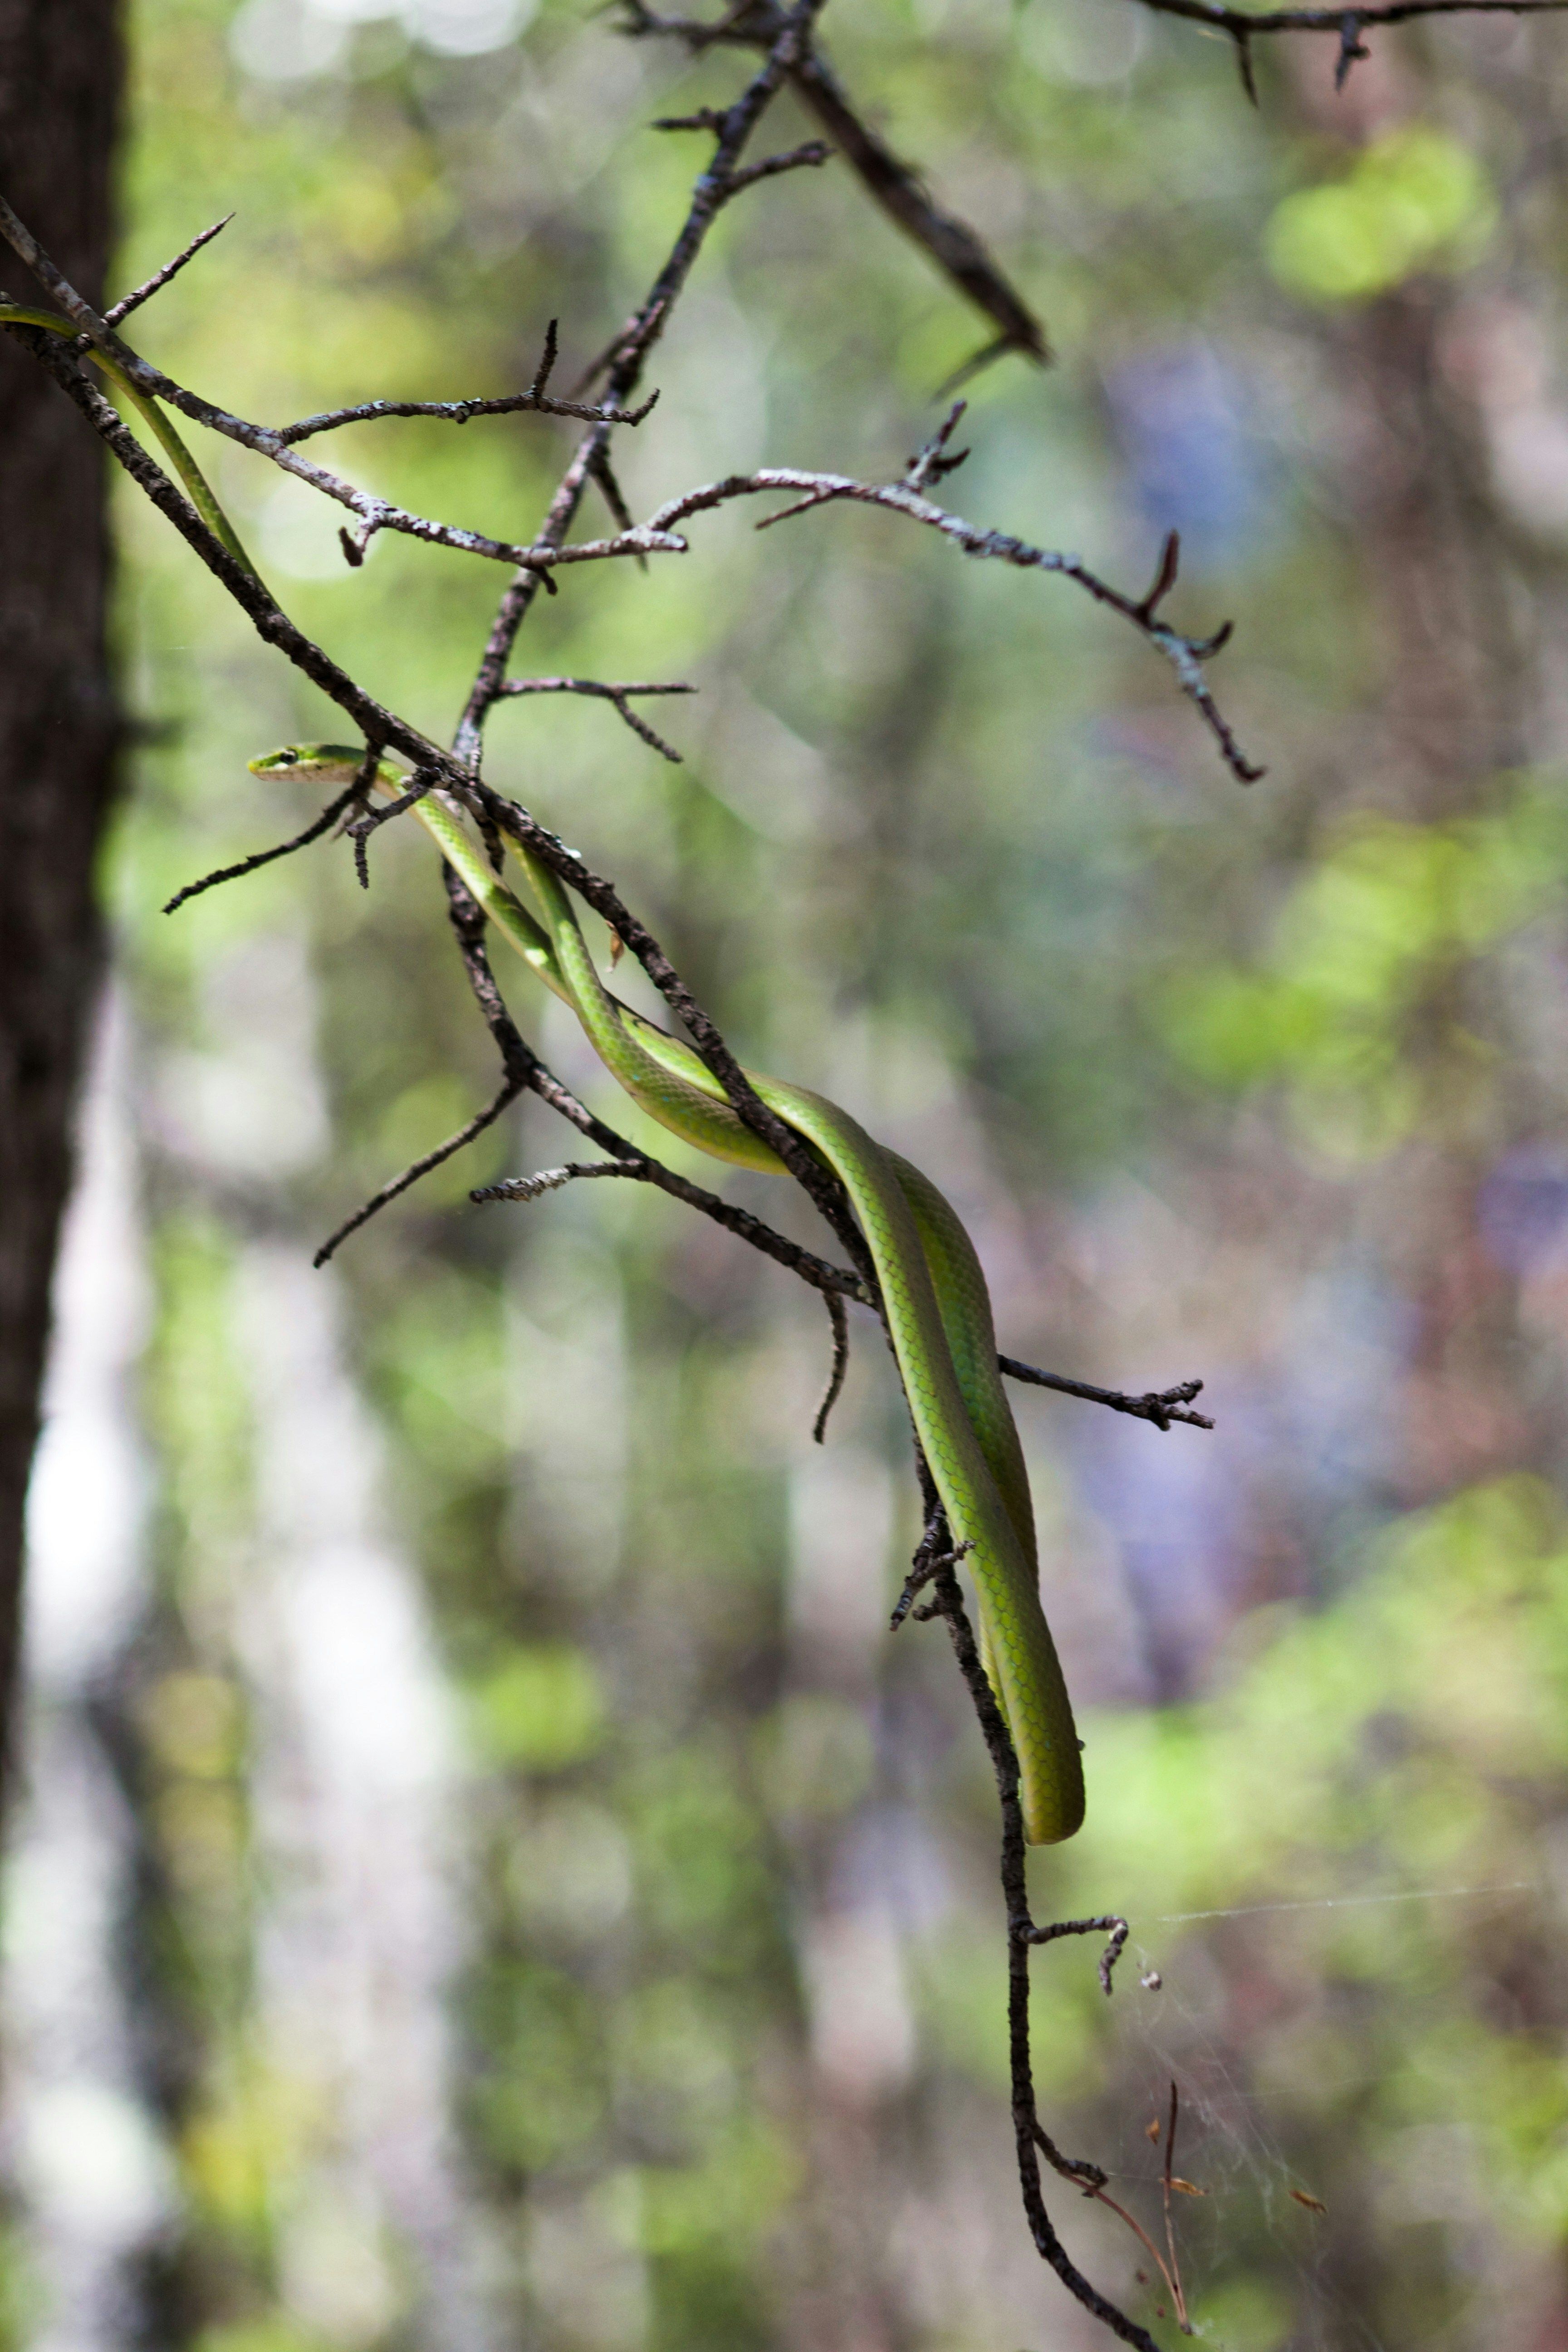 Green snake in a tree